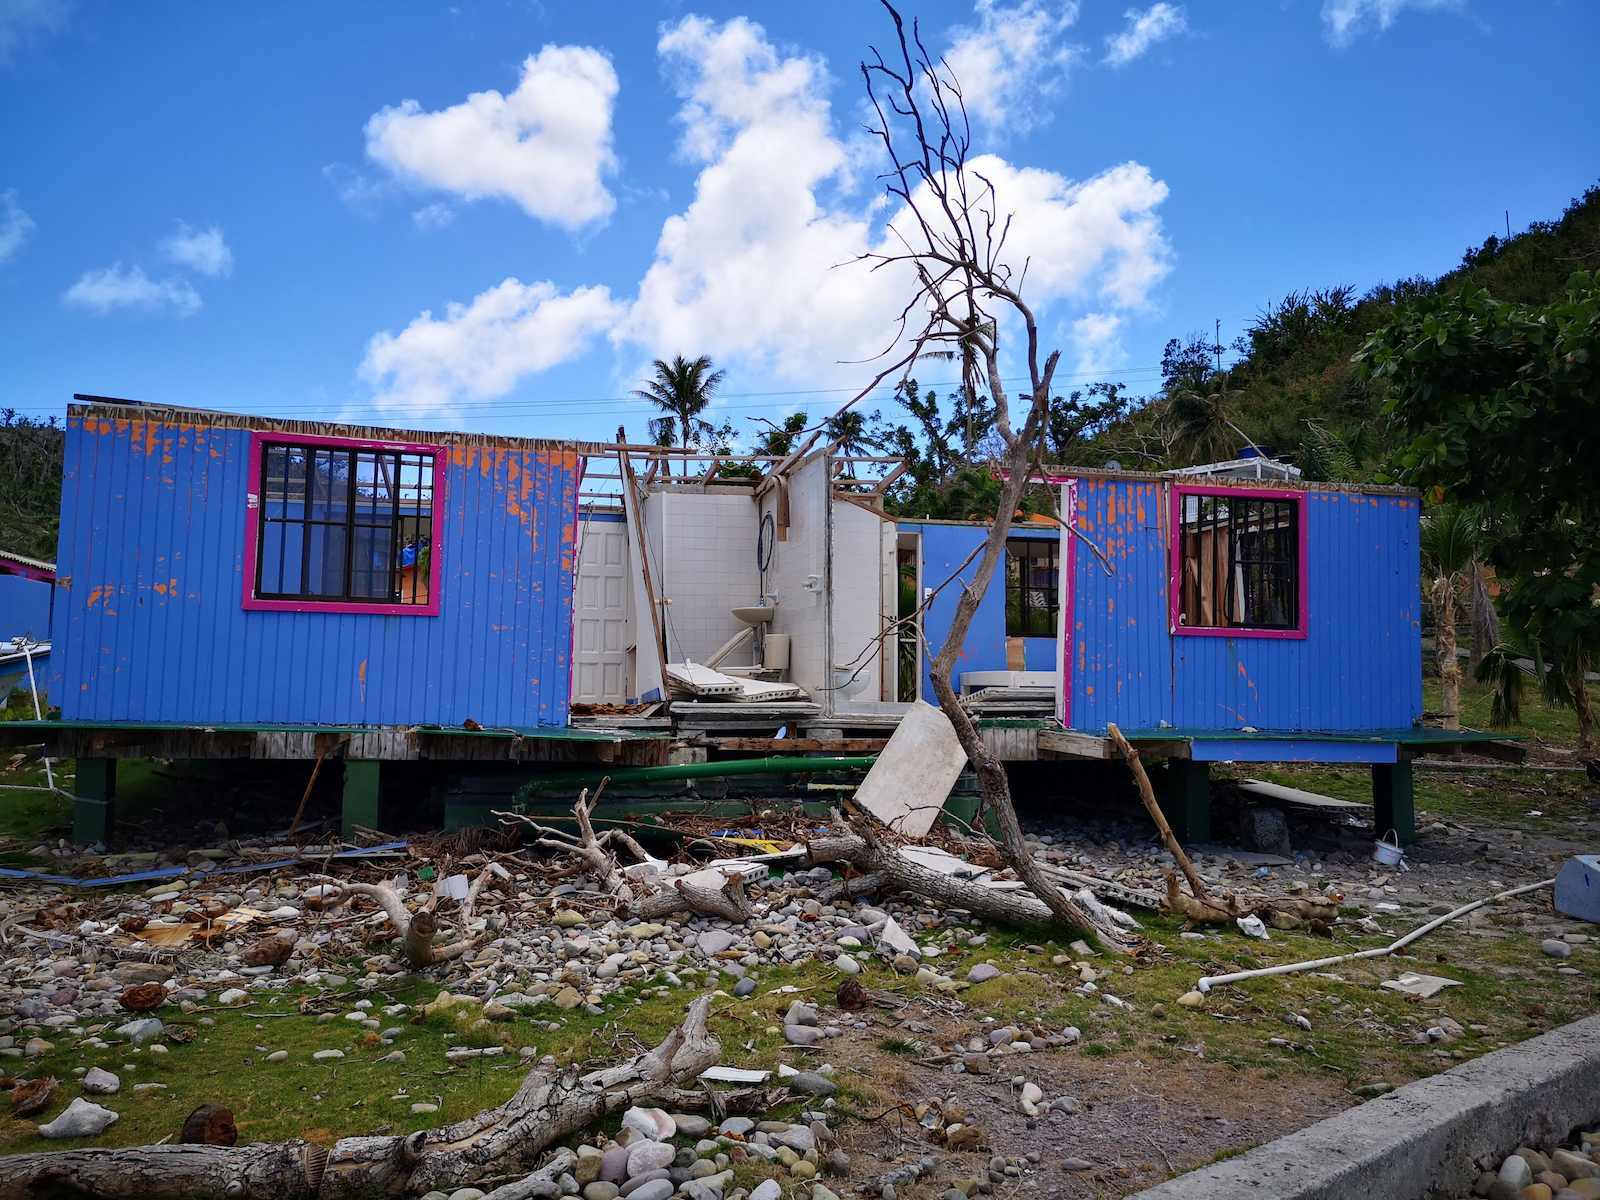 A home in a Columbian coastal community ravaged by a hurricane. Researchers in Colombia have been using wave and current data measured by Nortek’s ocean sensors to improve hurricane prediction. Photo: Juan David Osorio Cano/CEMarin.